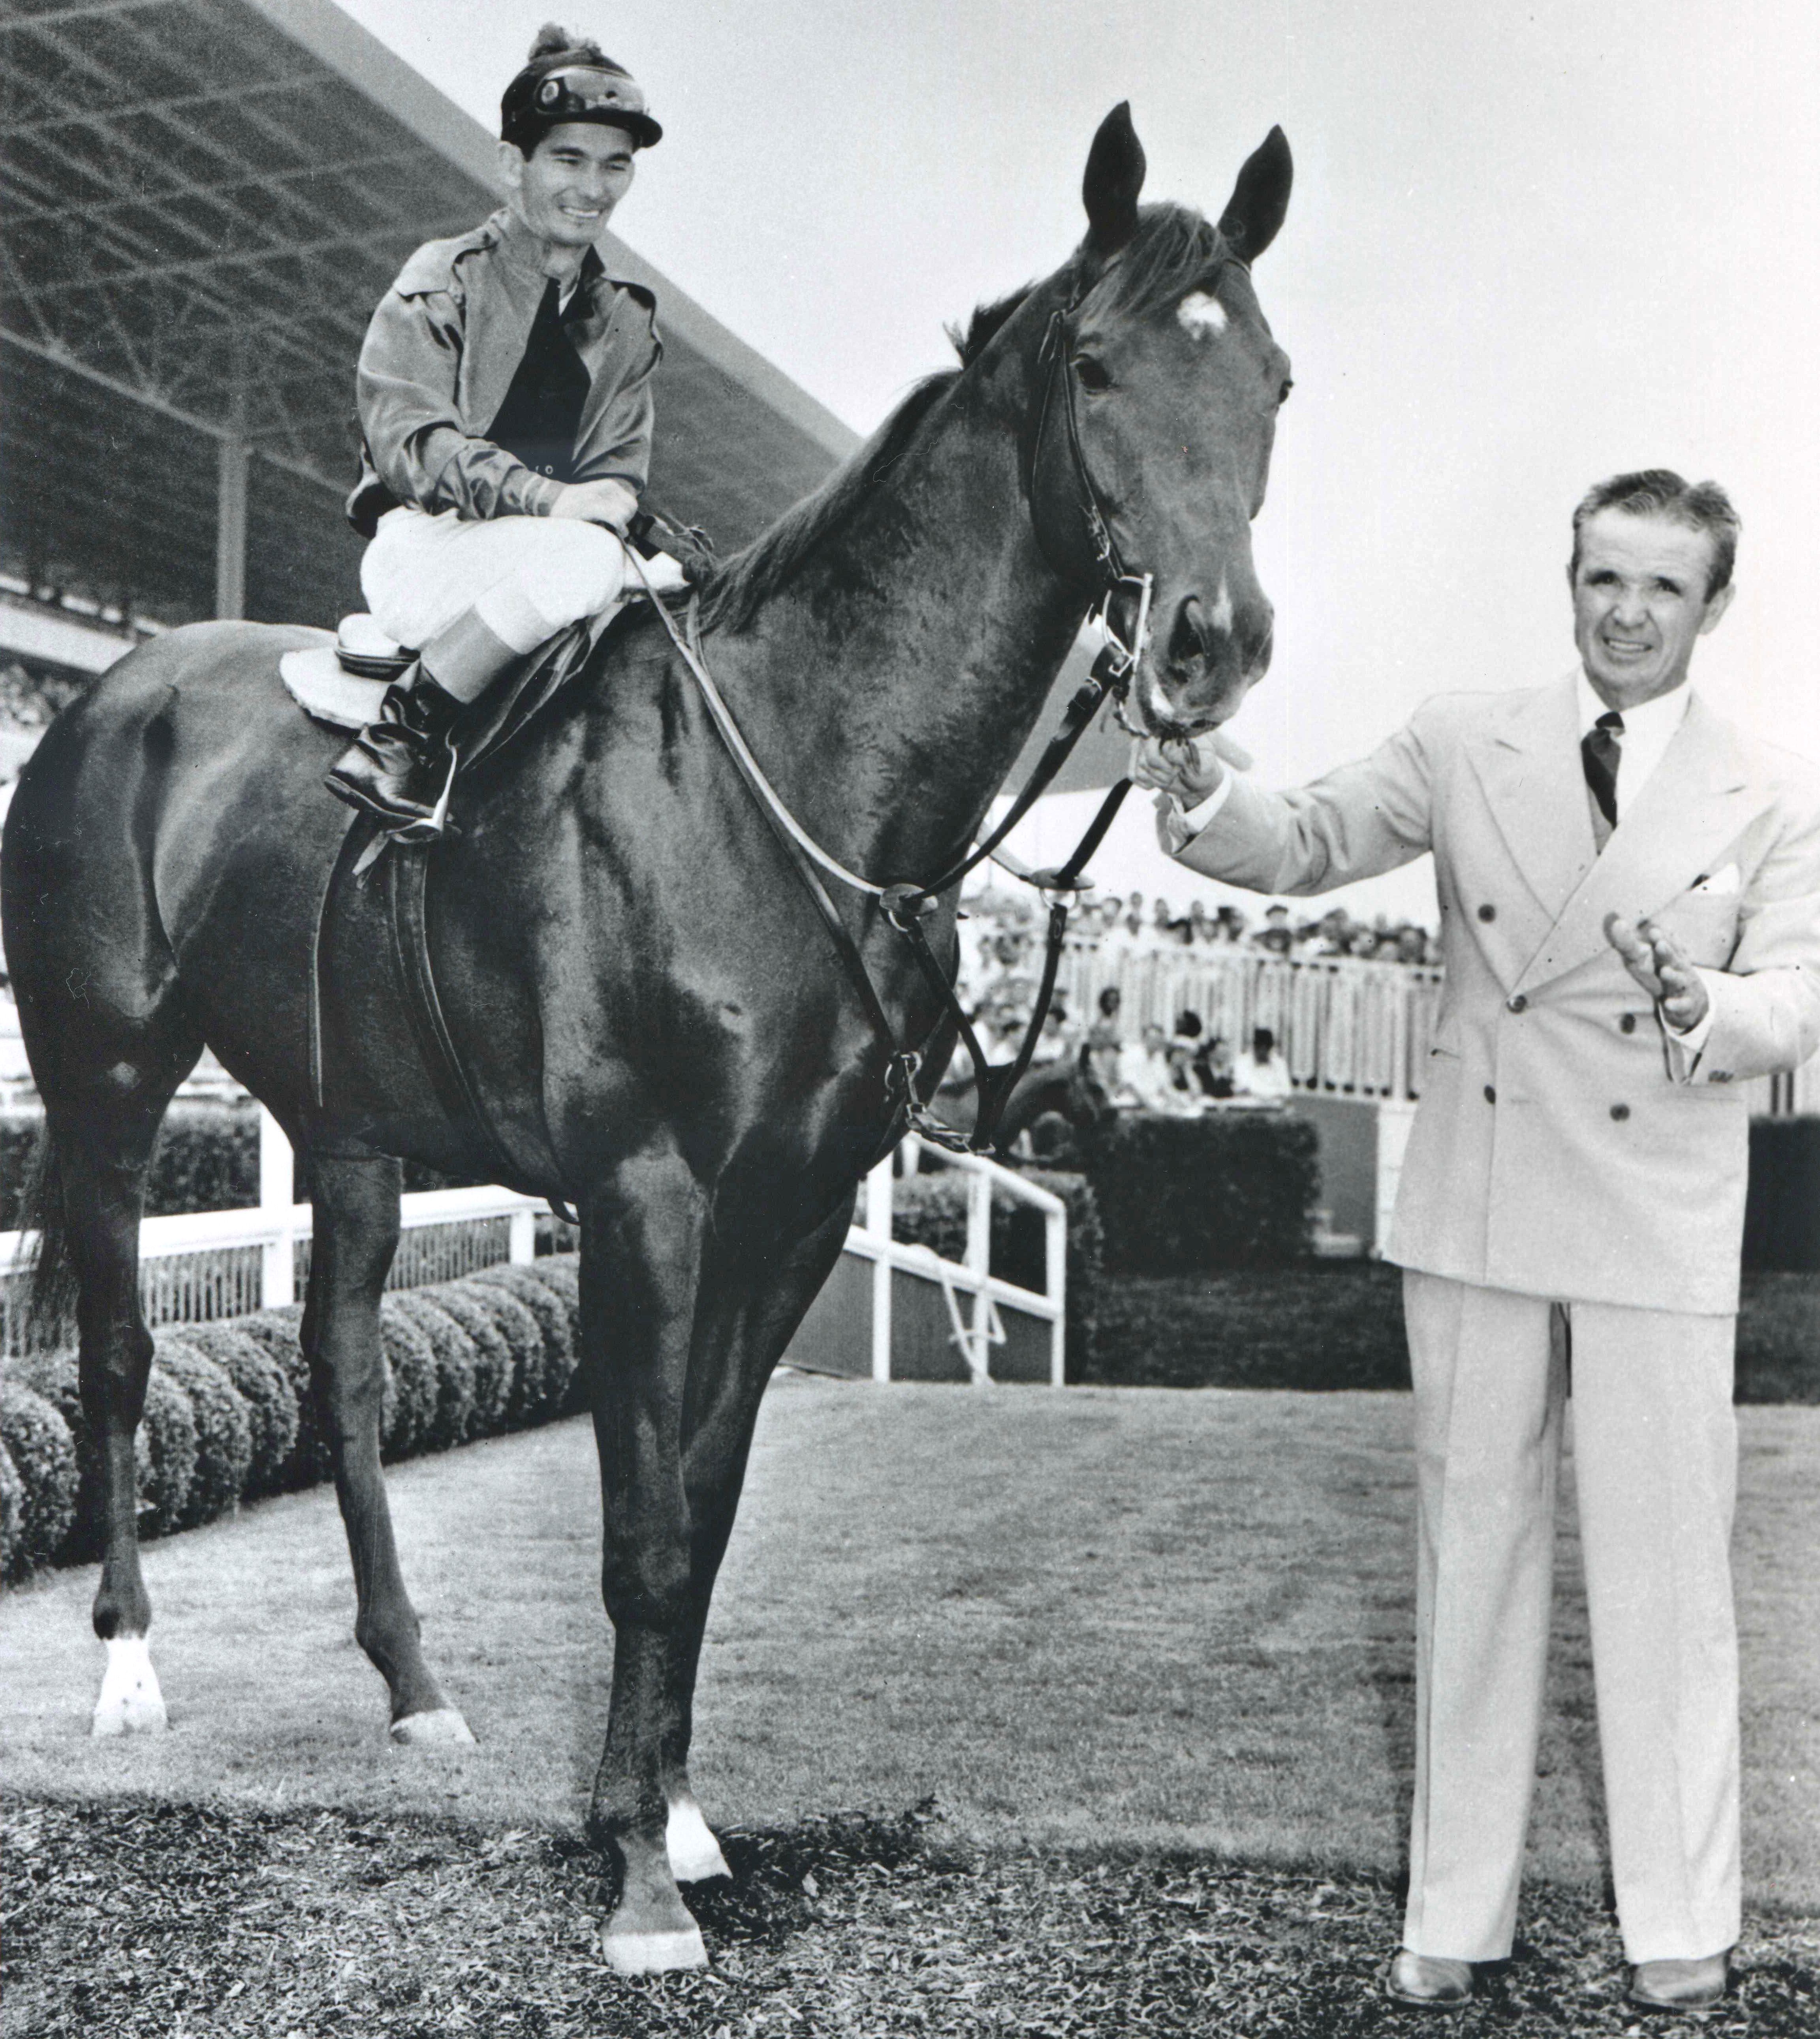 Swaps (Bill Shoemaker up) with trainer Mesh Tenney at Hollywood Park in 1955 (Bill Mochon/Museum Collection)